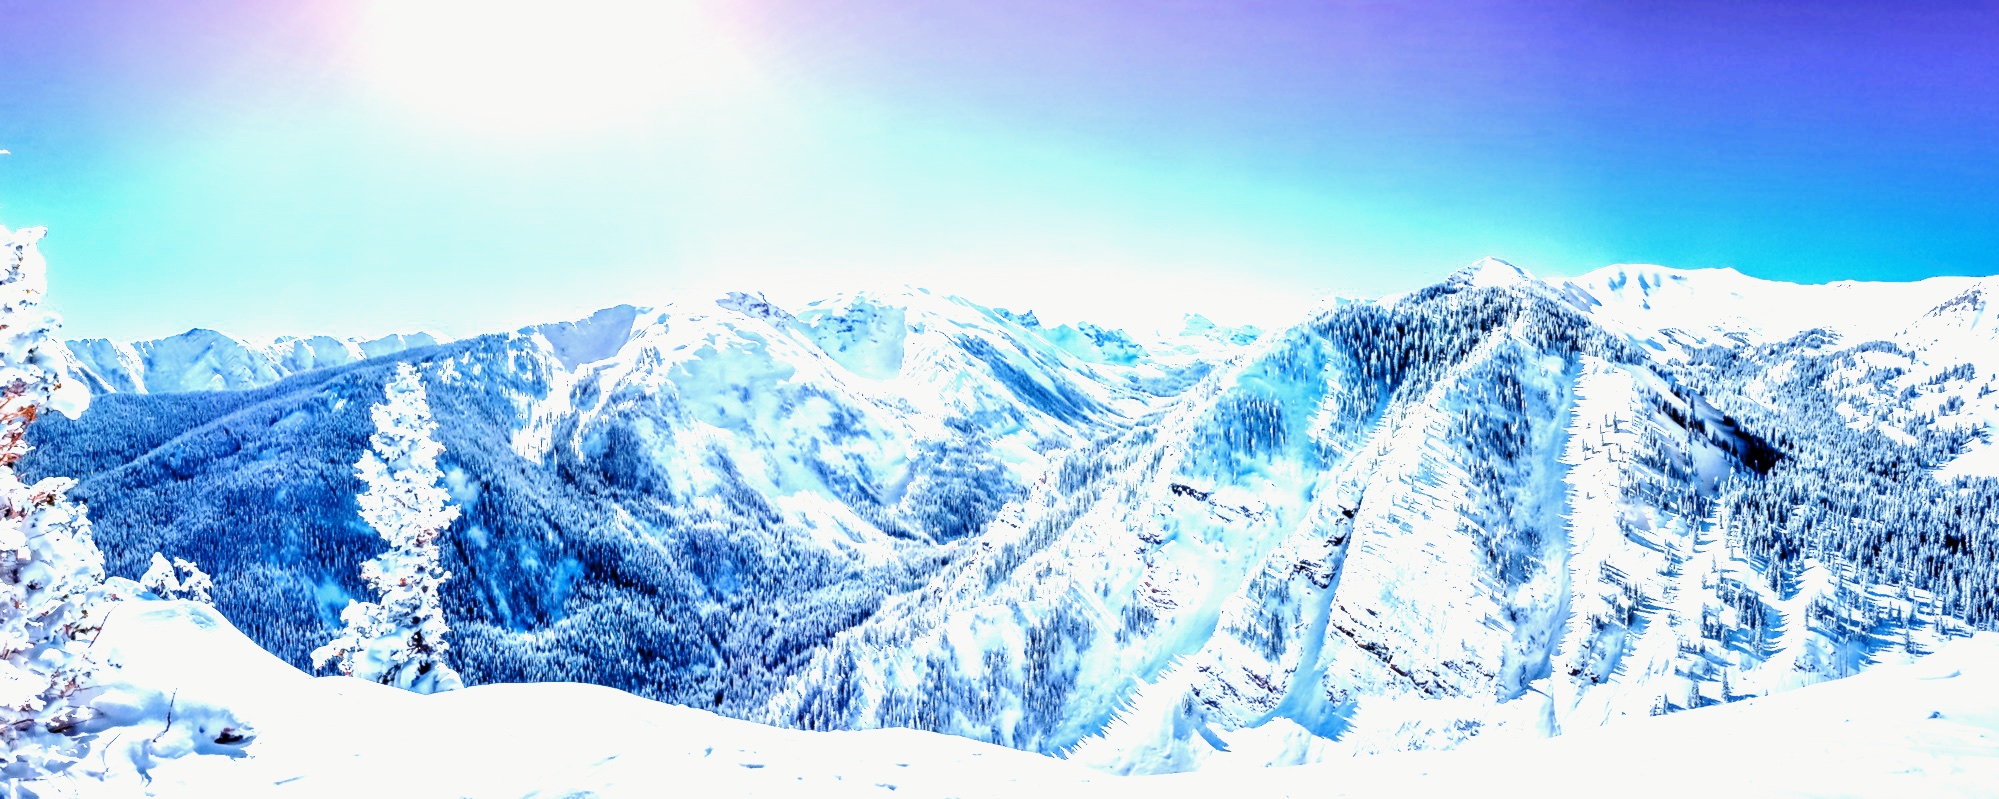 An image of snow-covered mountains with a high contrast, creating an almost artistic, drawing-like appearance.